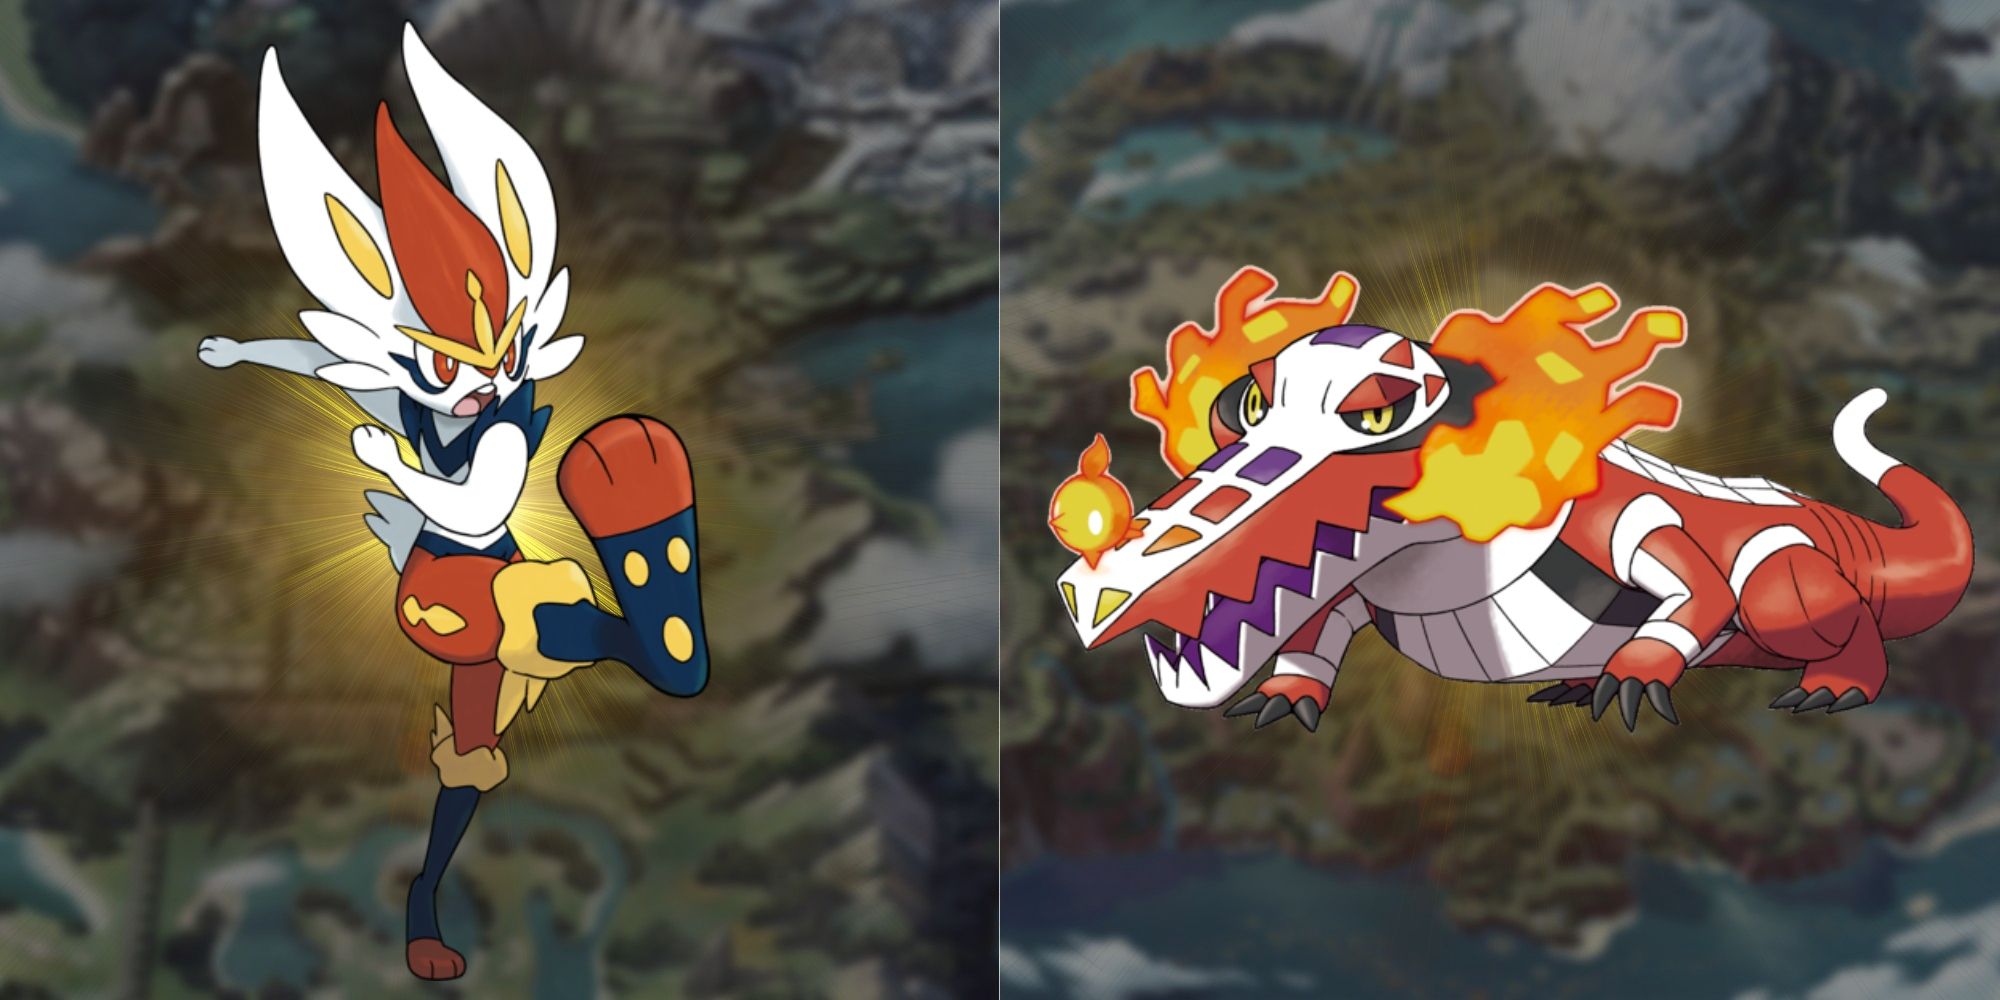 Pokemon's Cinderace to the left and Skeledirge to the right with a yellow backlight behind each of them. In the background there are blurred-out images of the Galar and Paldea maps, respectively.